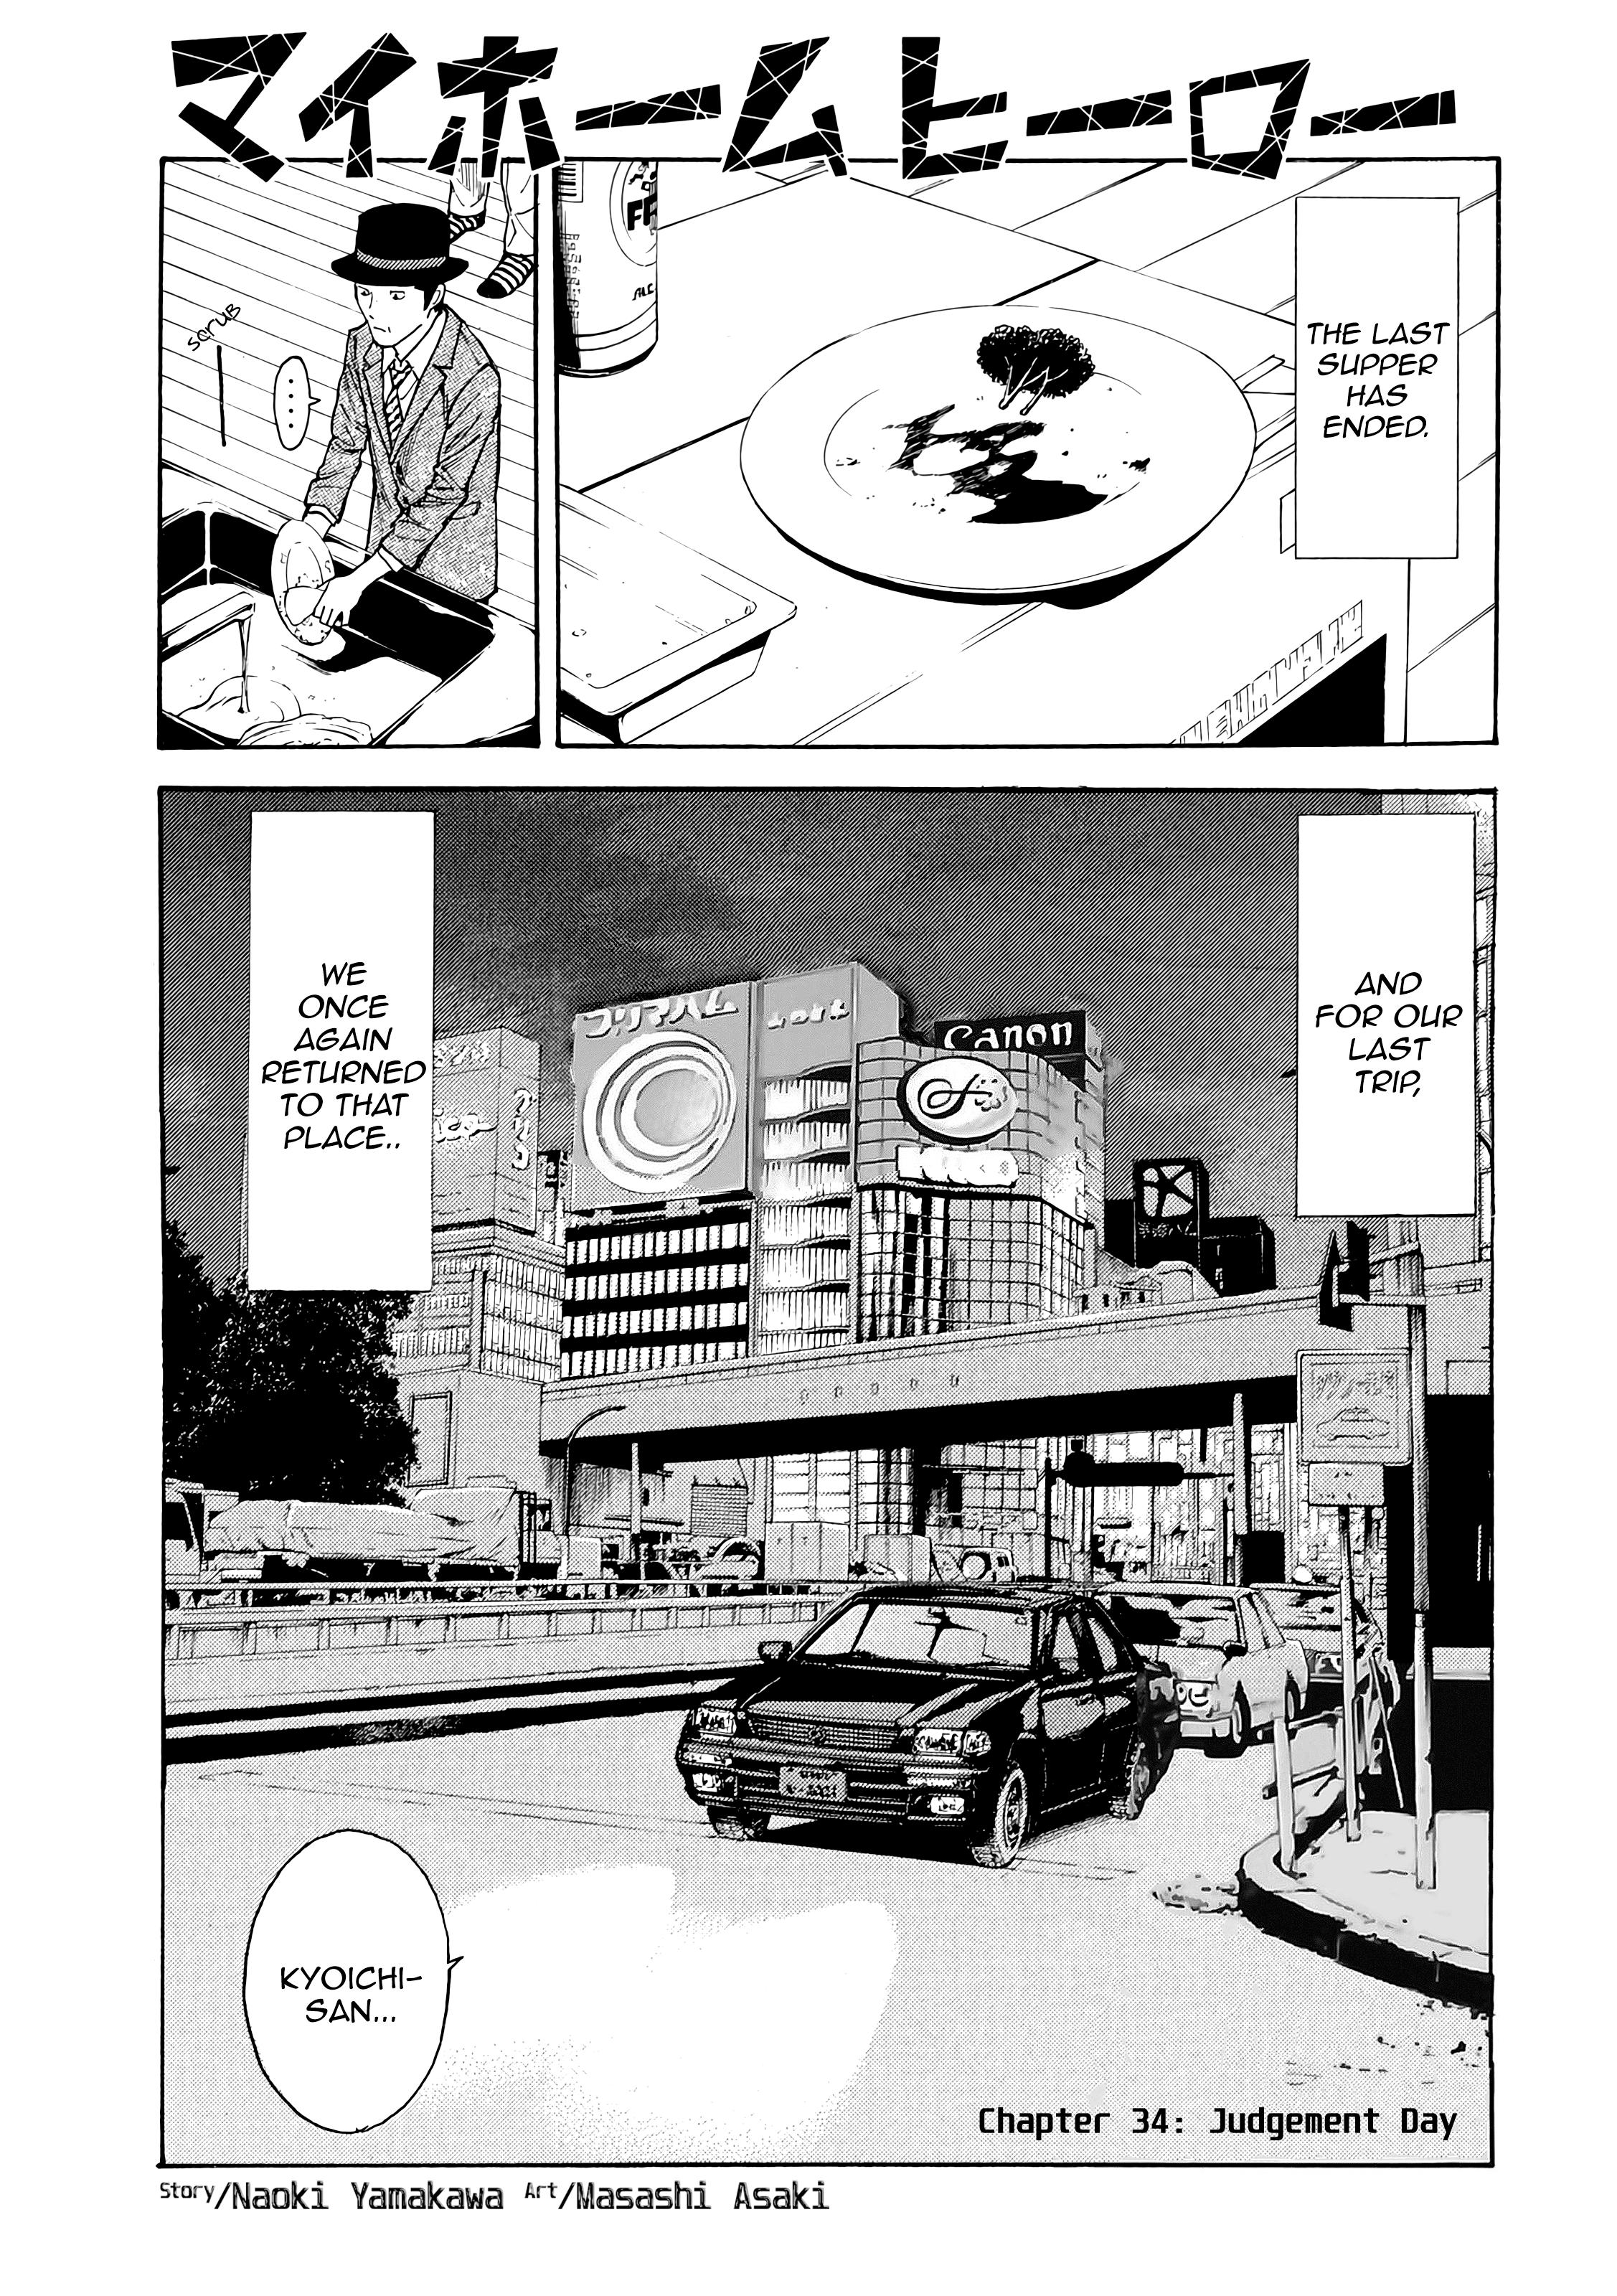 My Home Hero by Naoki - Cool Manga Panels or Pages I found